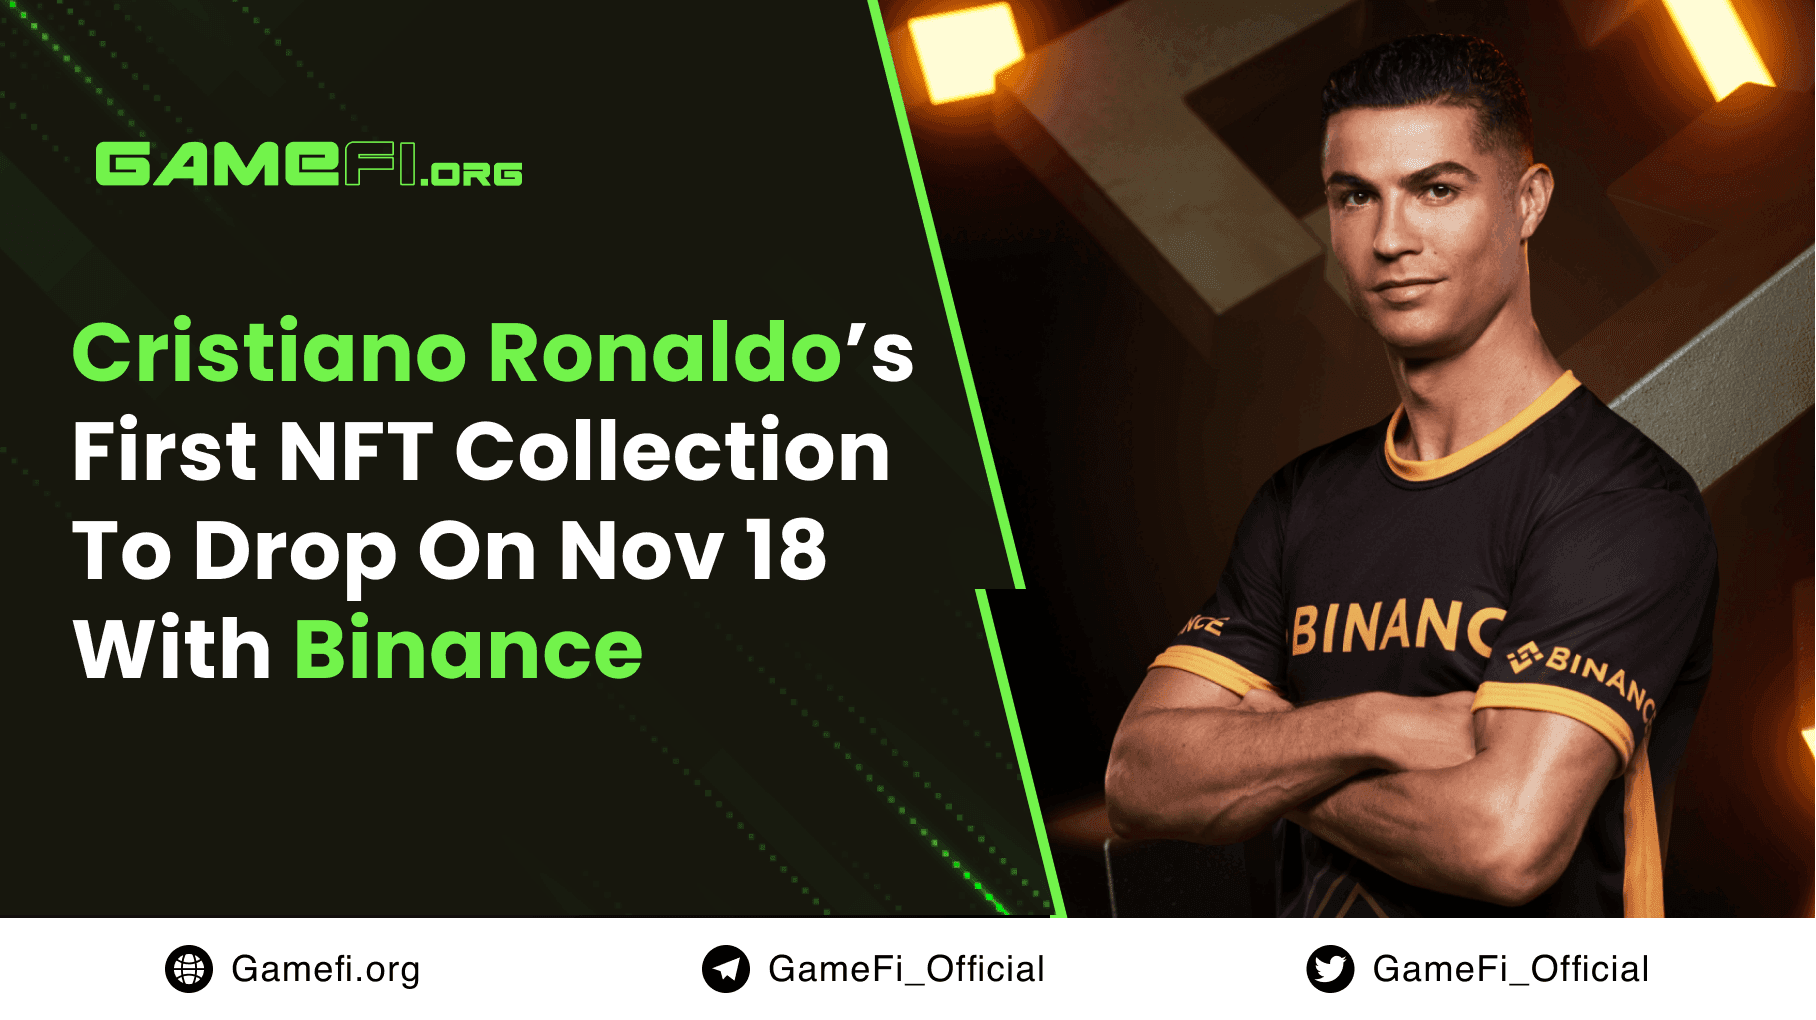 Cristiano Ronaldo’s First NFT Collection to Drop on November 18 with Binance